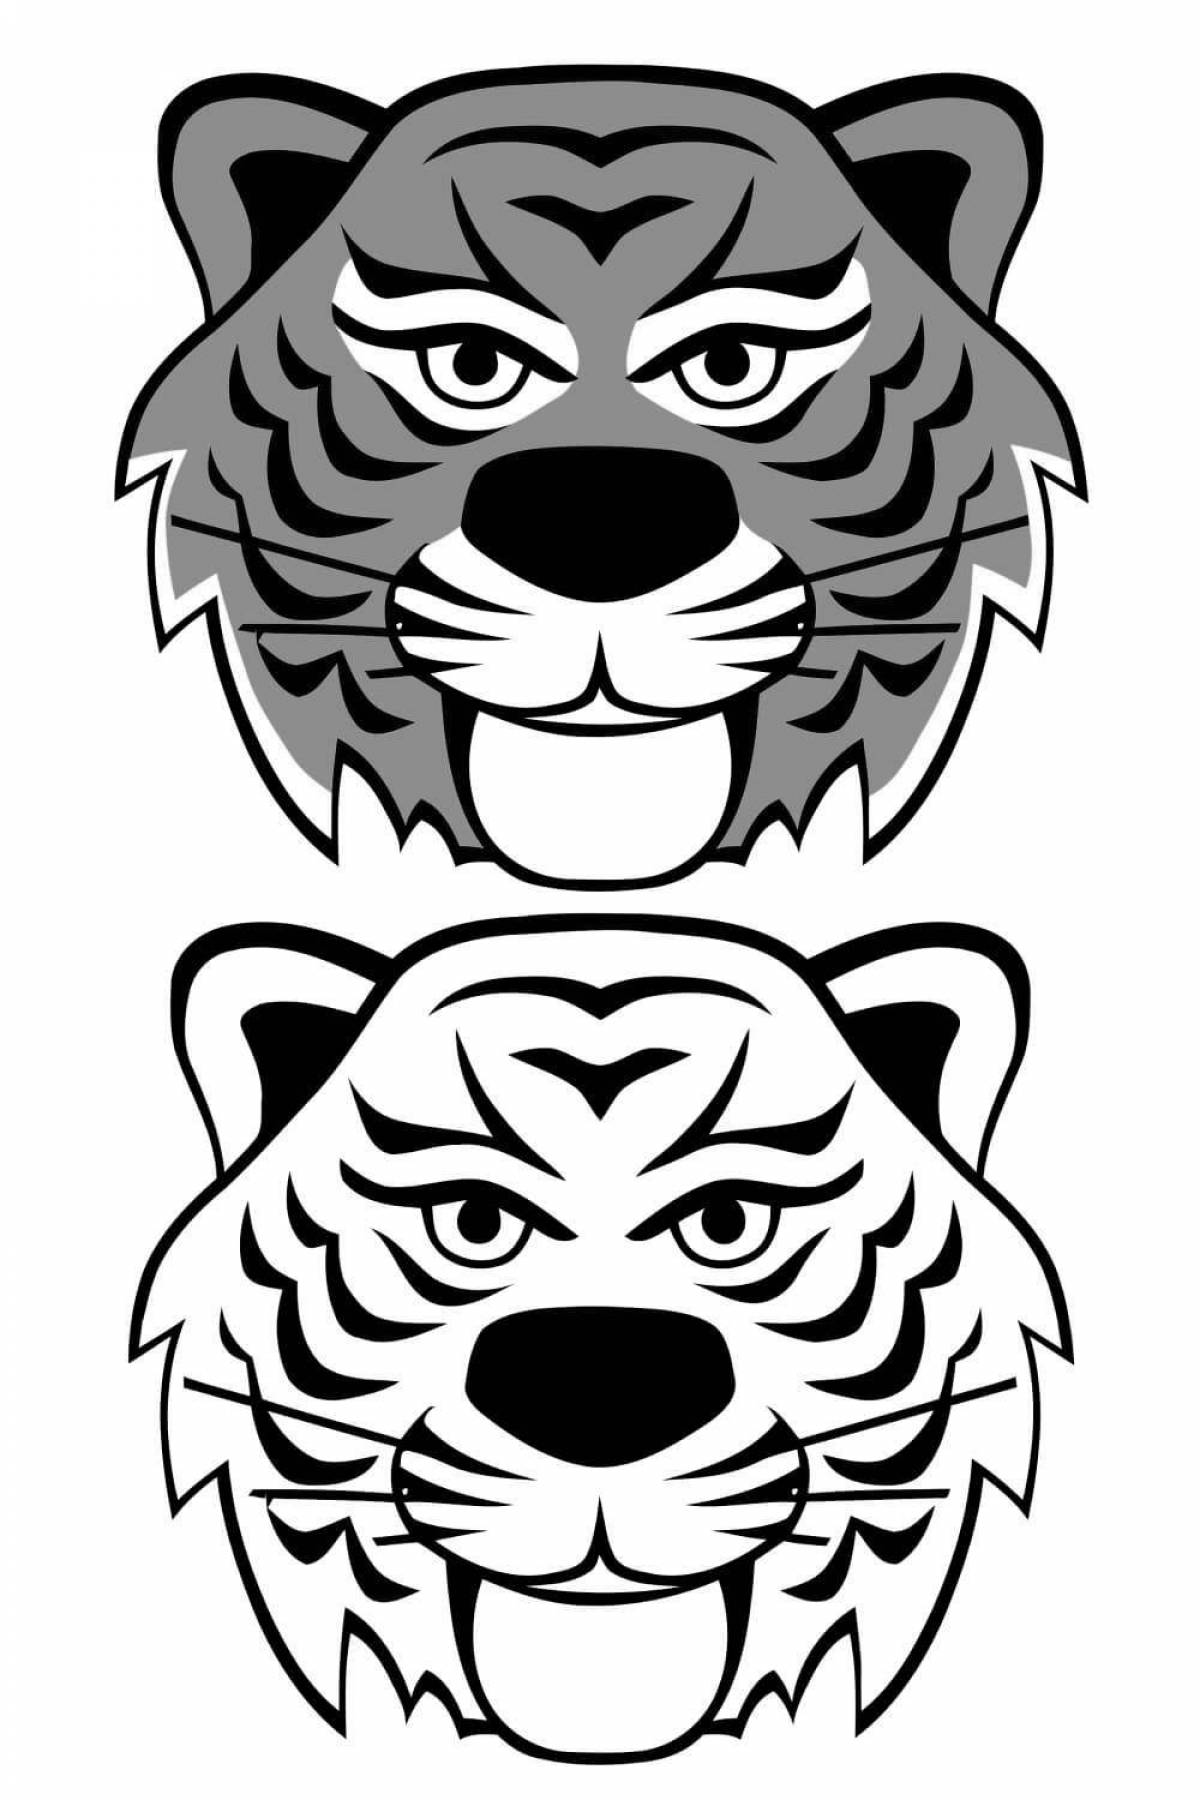 Amazing tiger mask coloring page